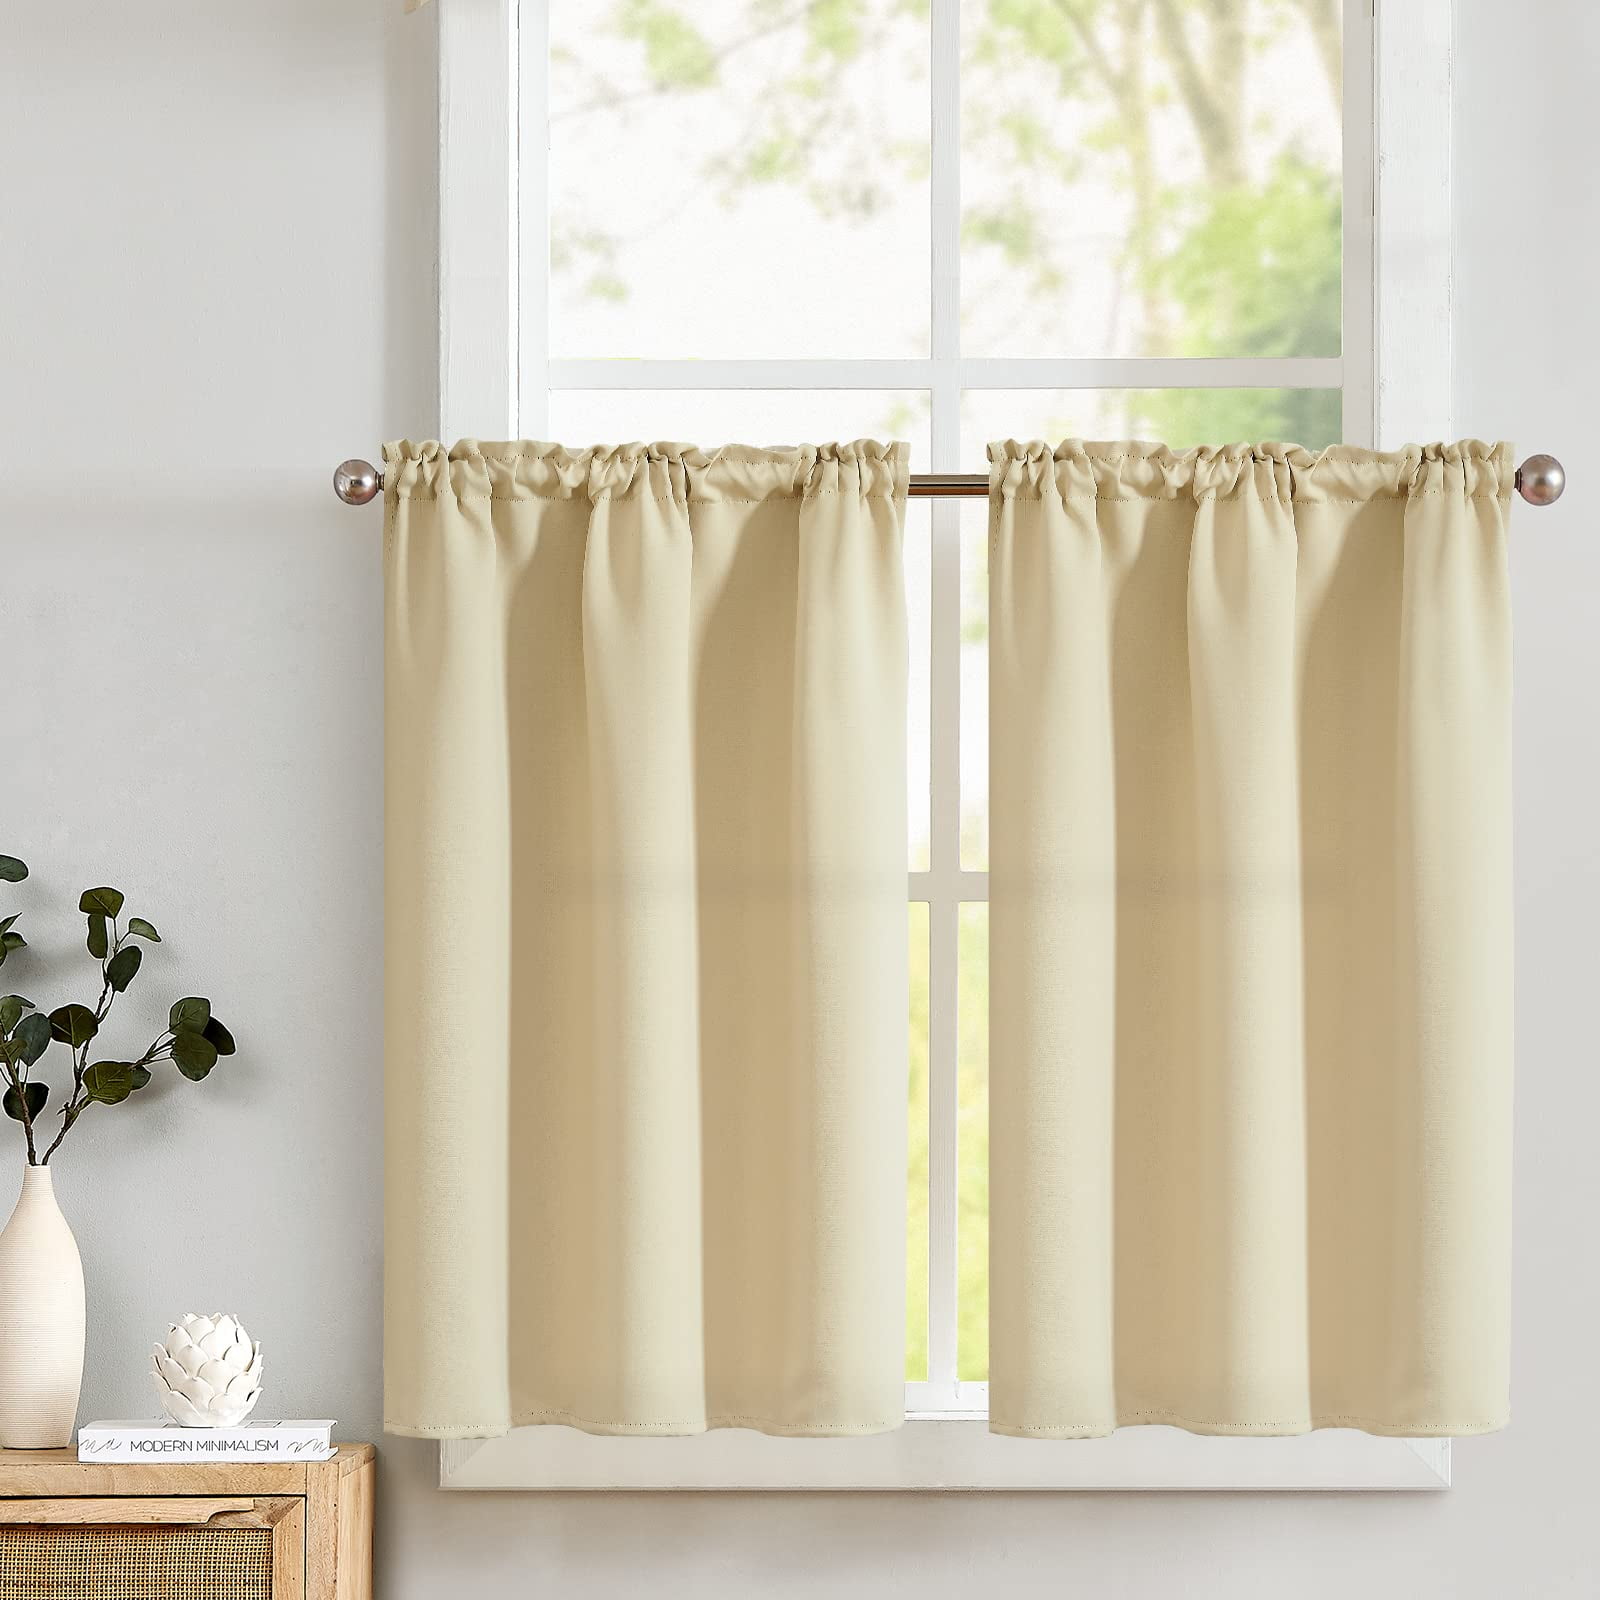 Curtainking Blackout Kitchen Curtains 36 Inch 2 Panels Soft Tier ...